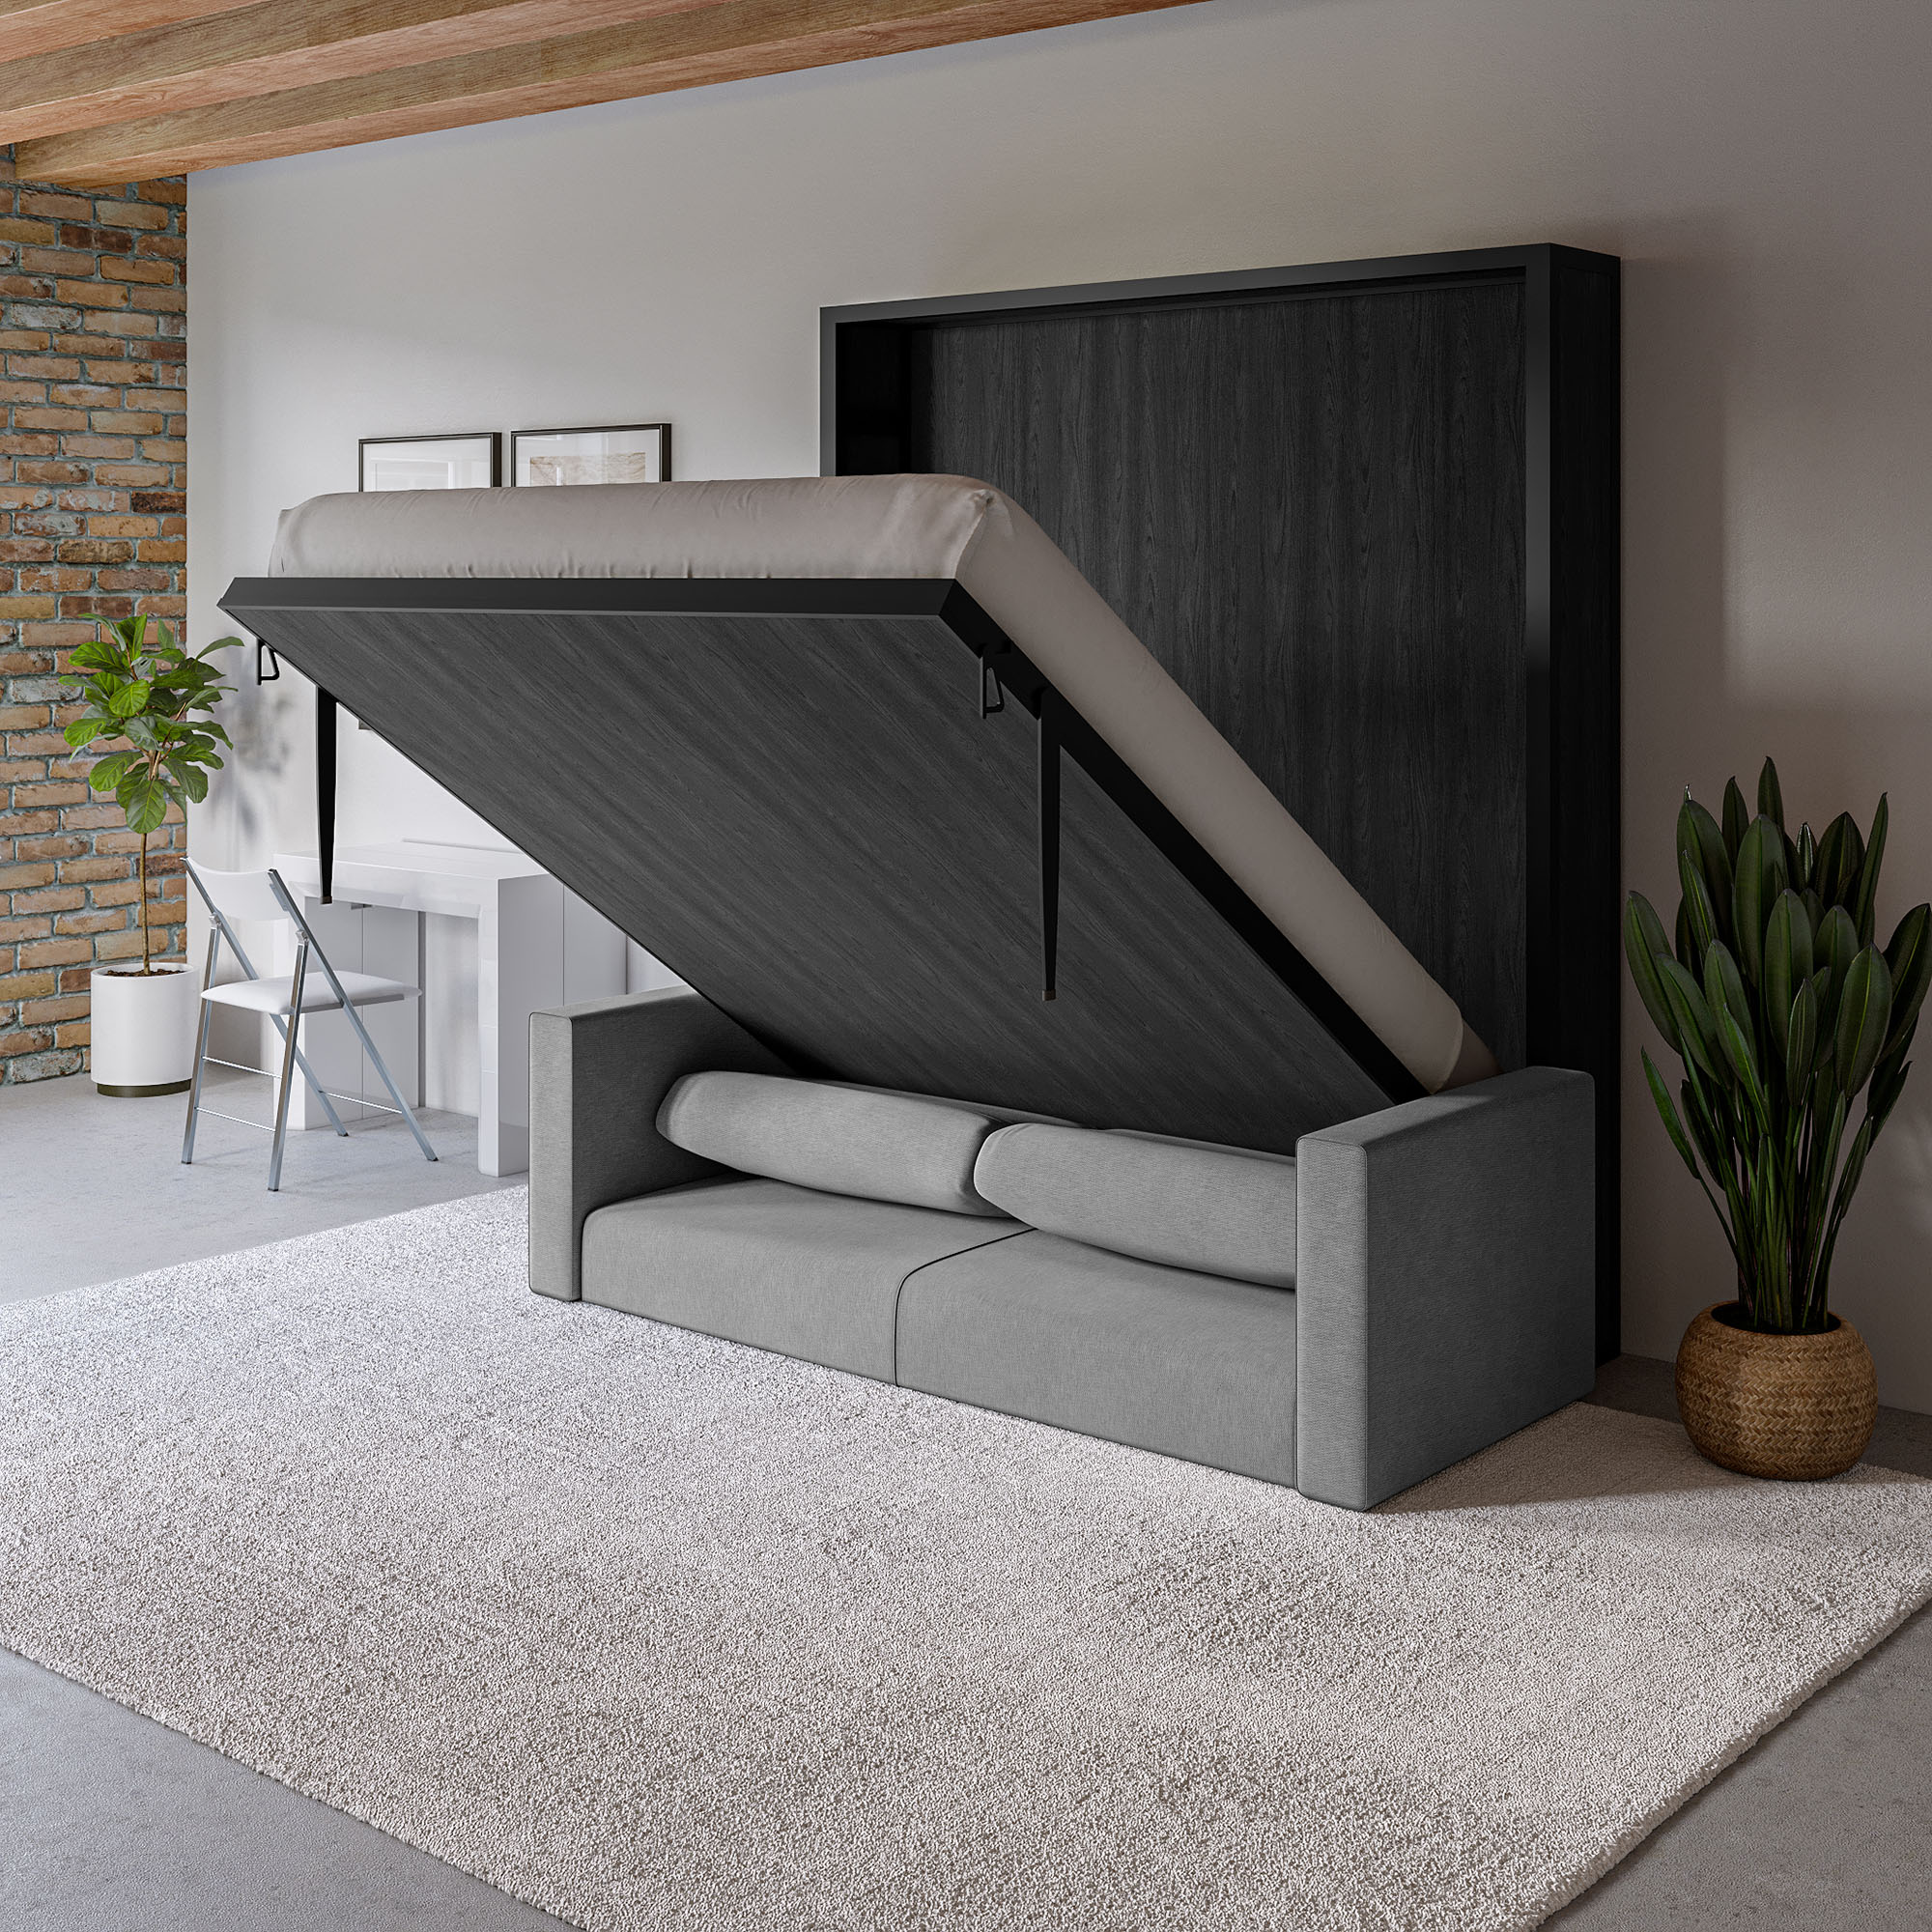 Compatto – Freestanding Wall Bed Sofa - Expand Furniture - Folding Tables,  Smarter Wall Beds, Space Savers